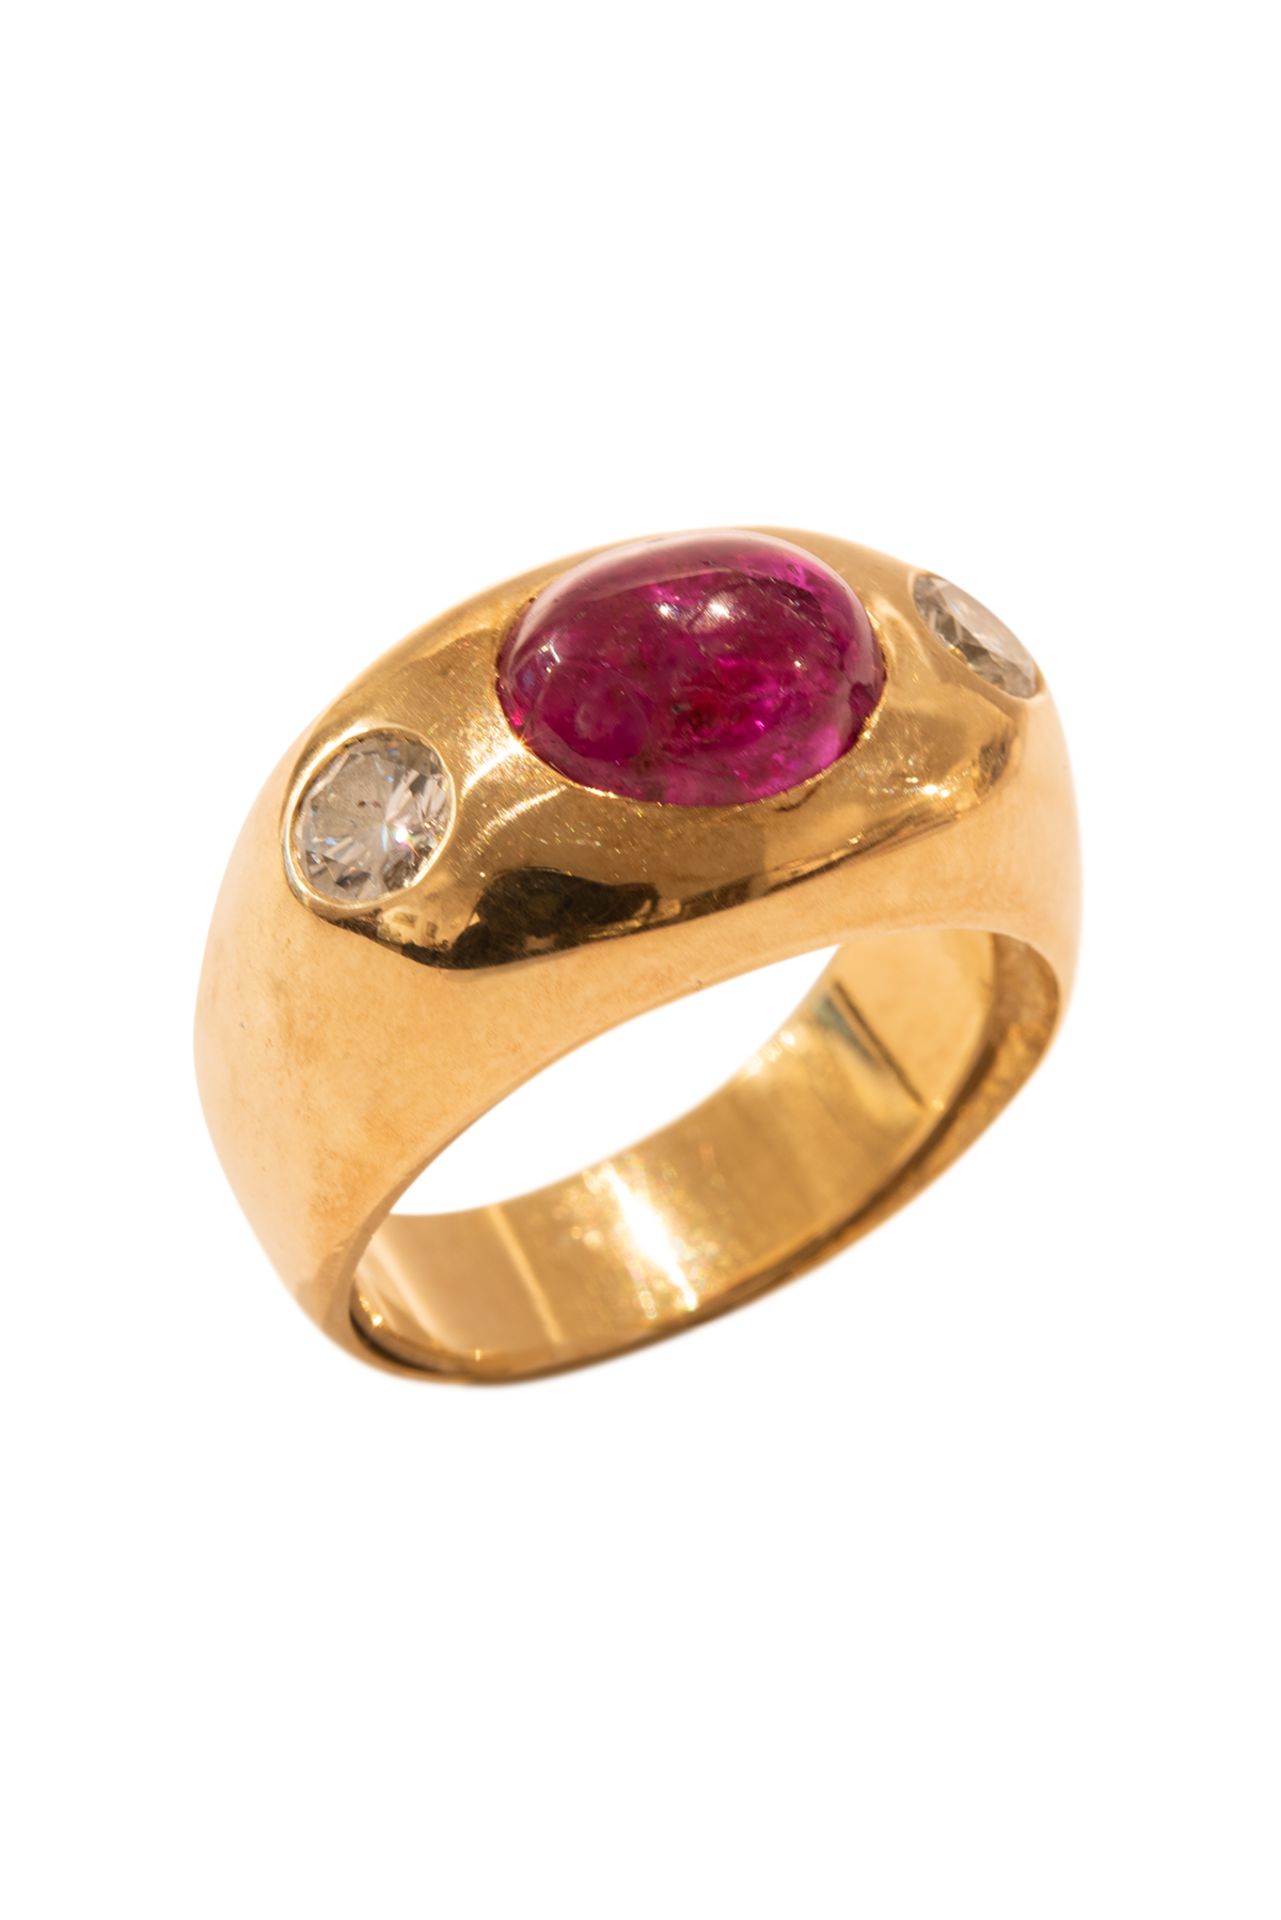 Ring with brilliant diamonds and ruby - Image 4 of 4